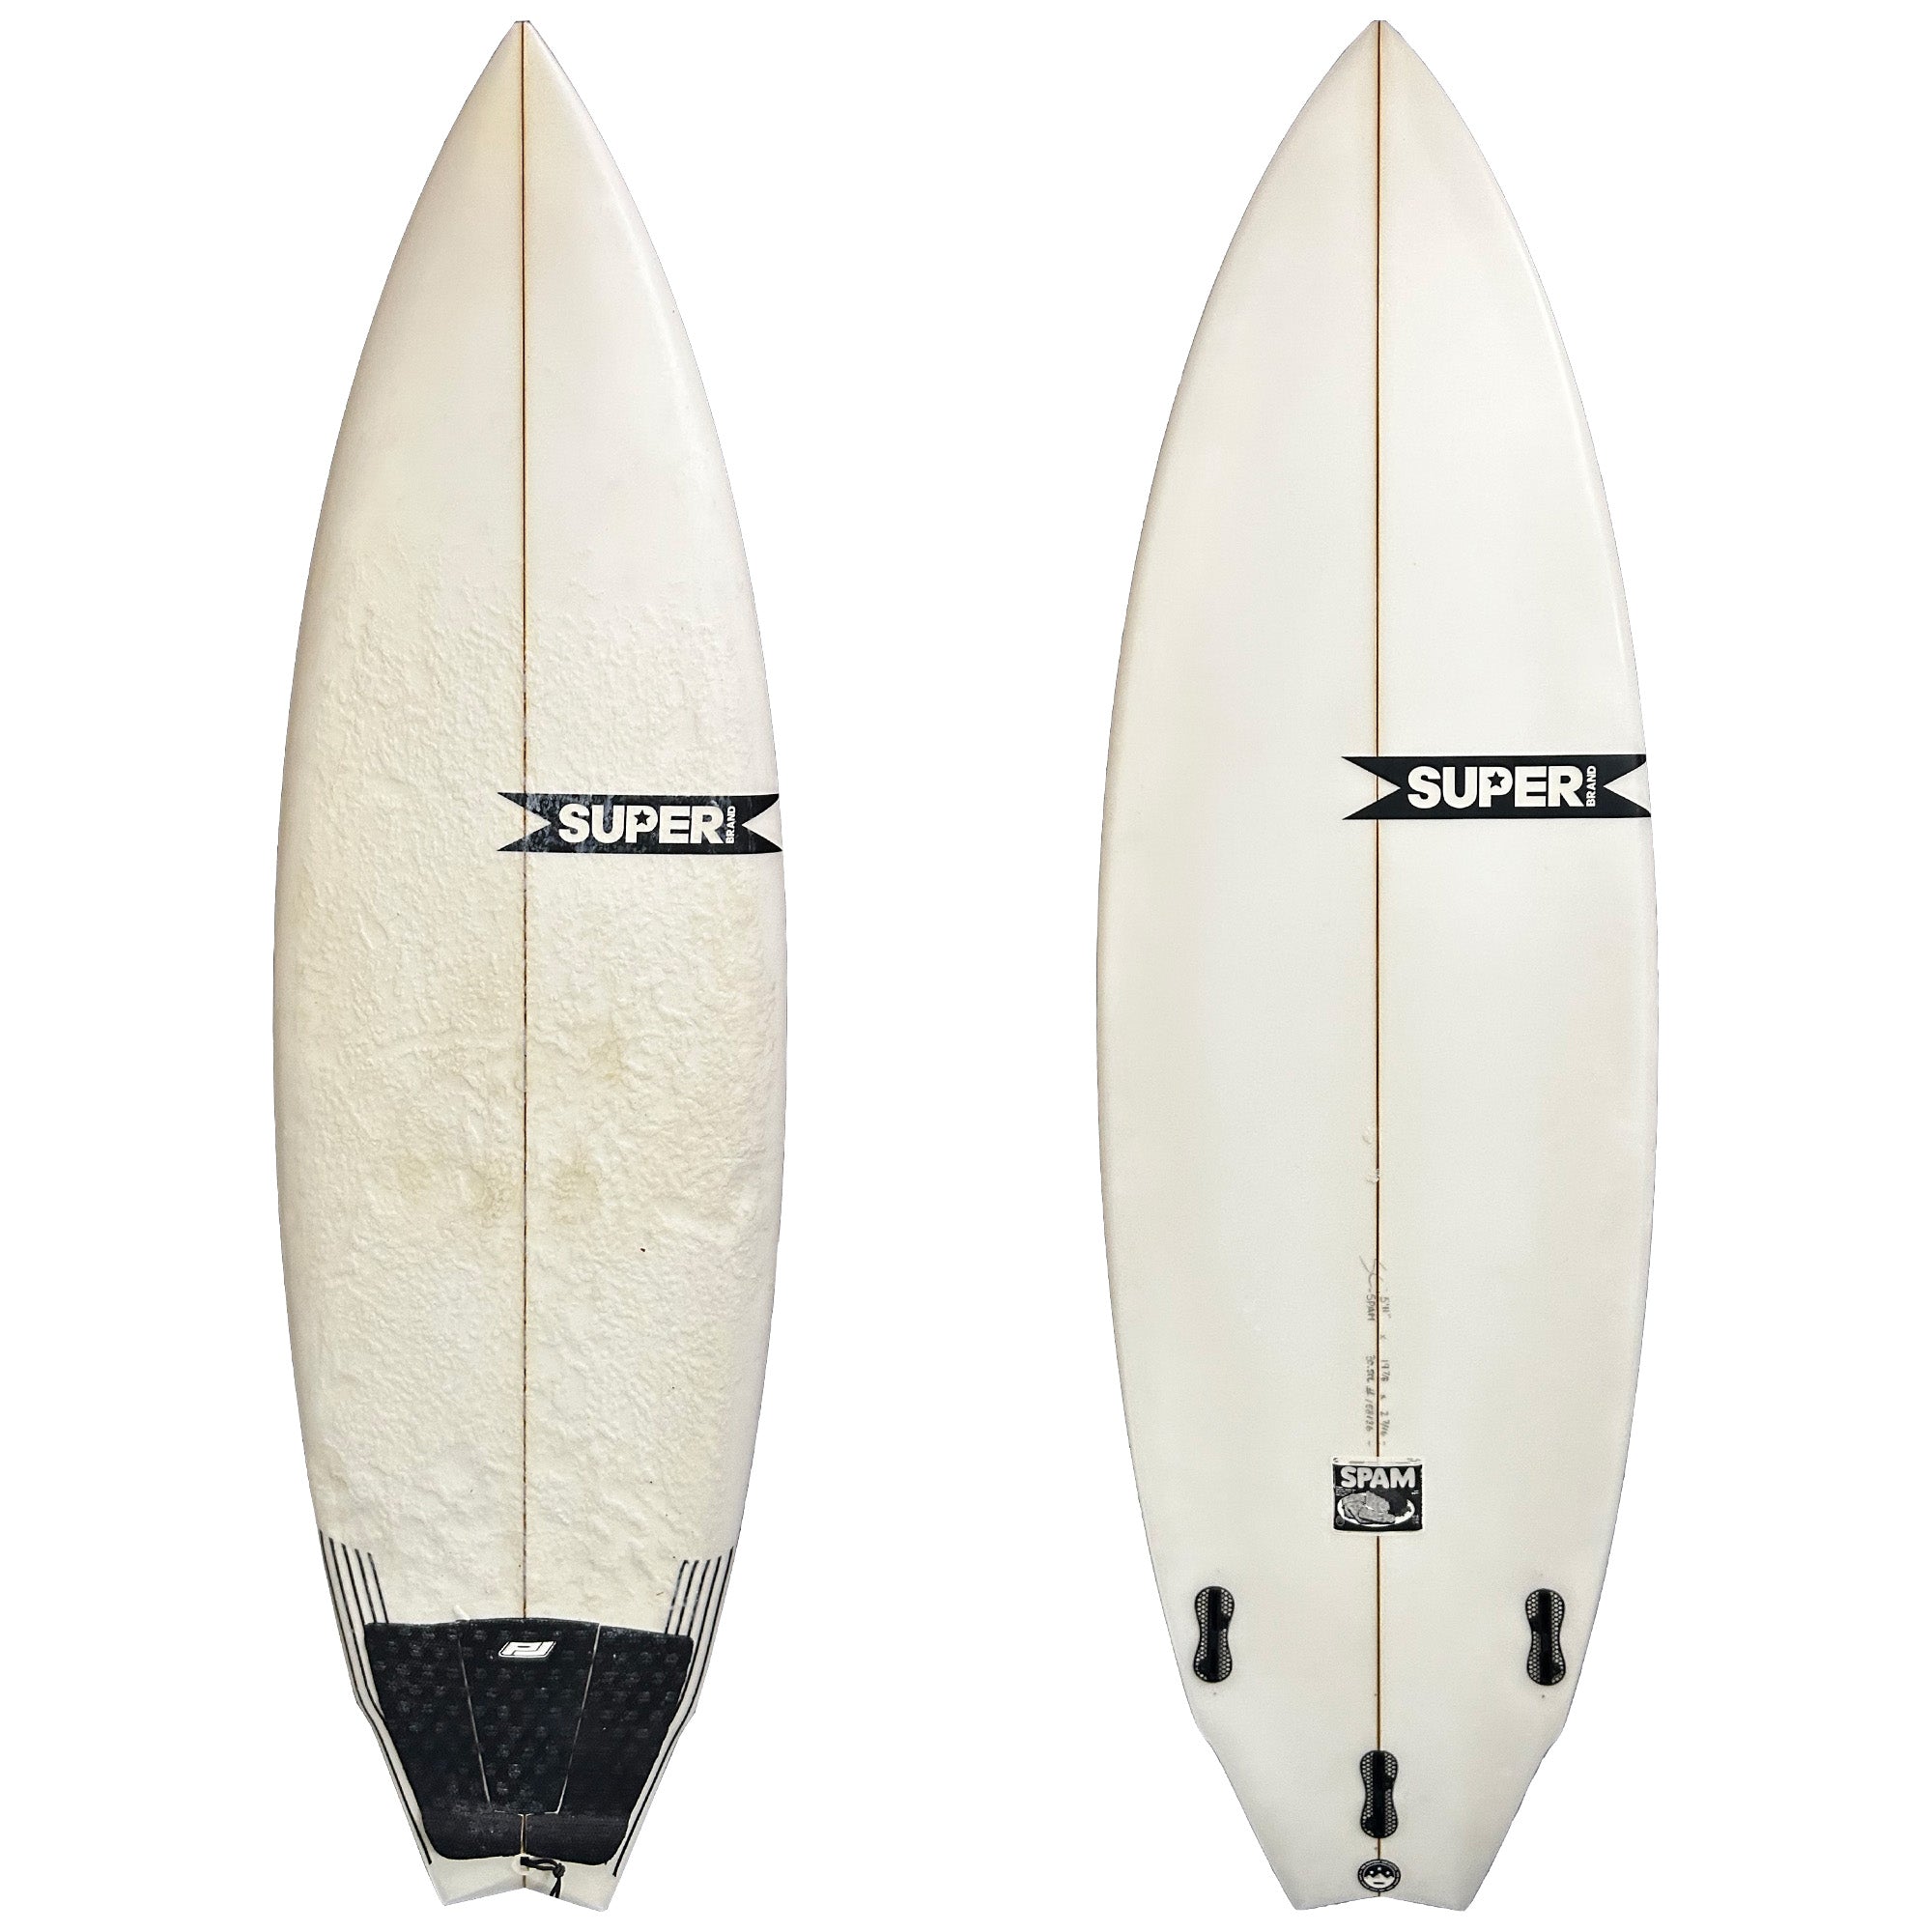 Superbrand the Spam 5'11 Used Surfboard